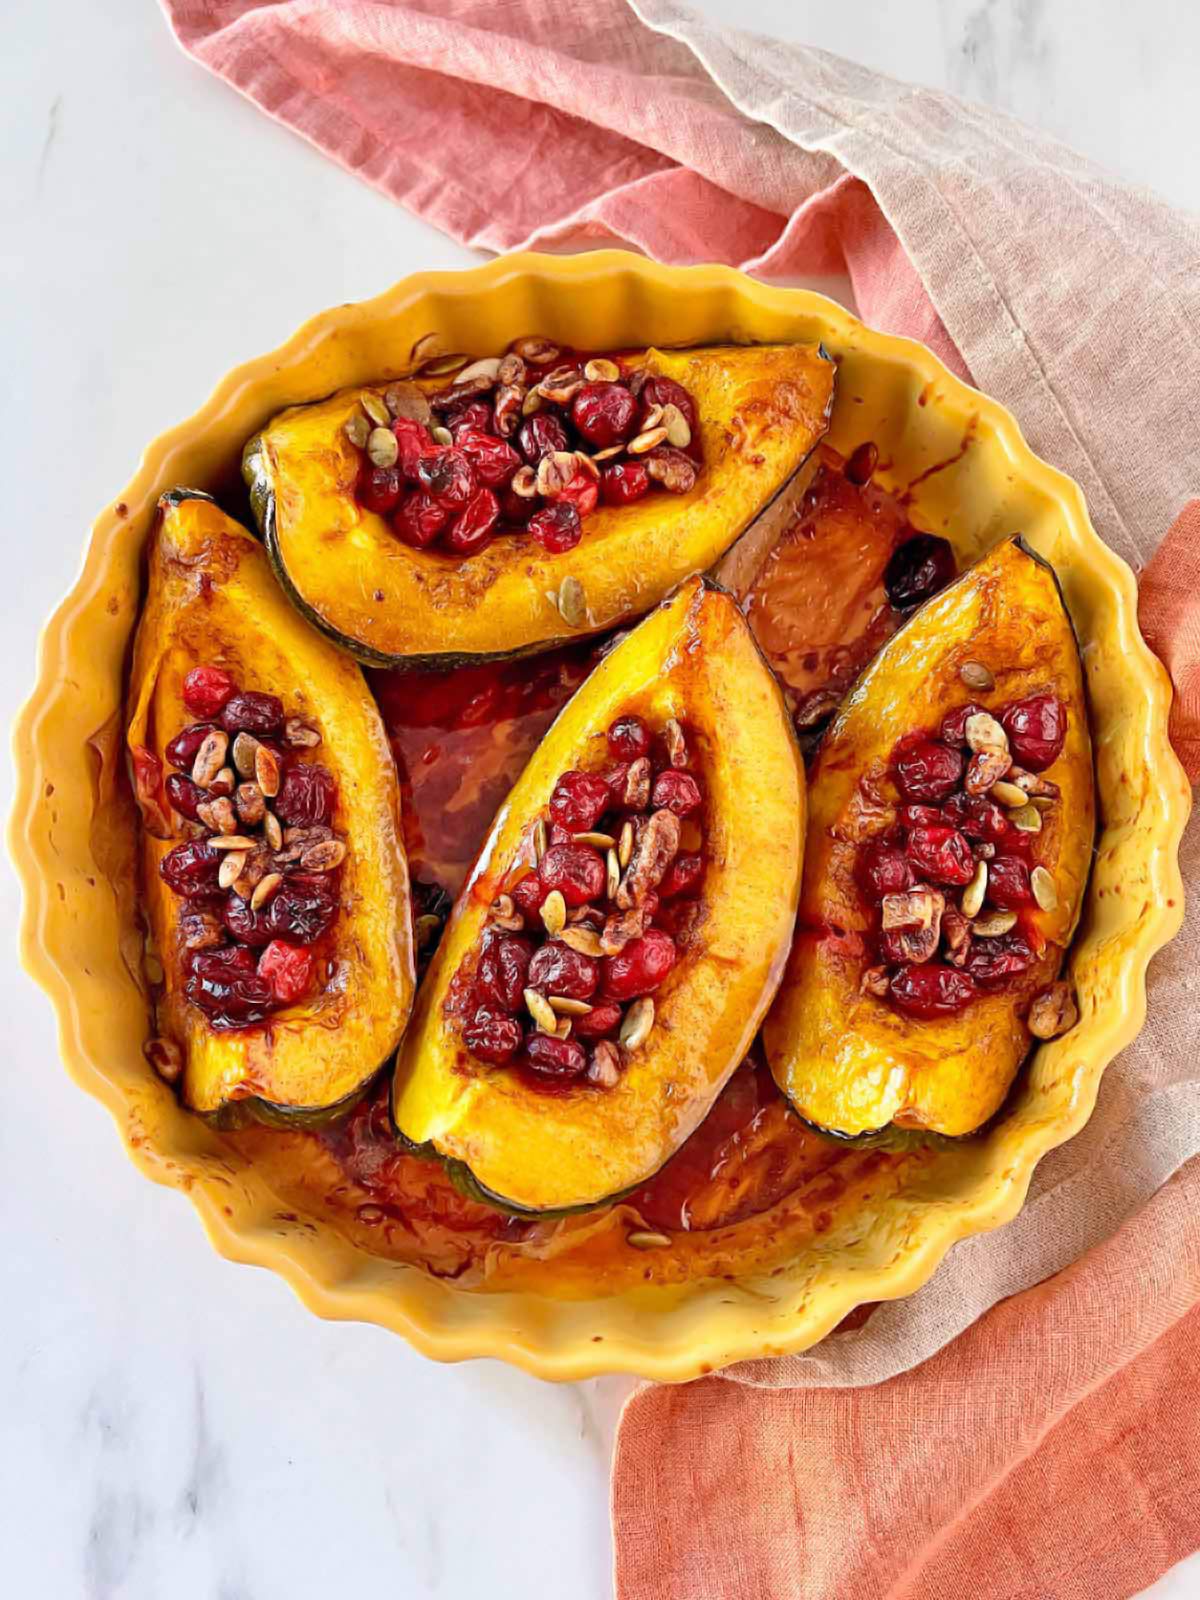 Baking dish with foru wedges of cooked acorn squash with cranberries.